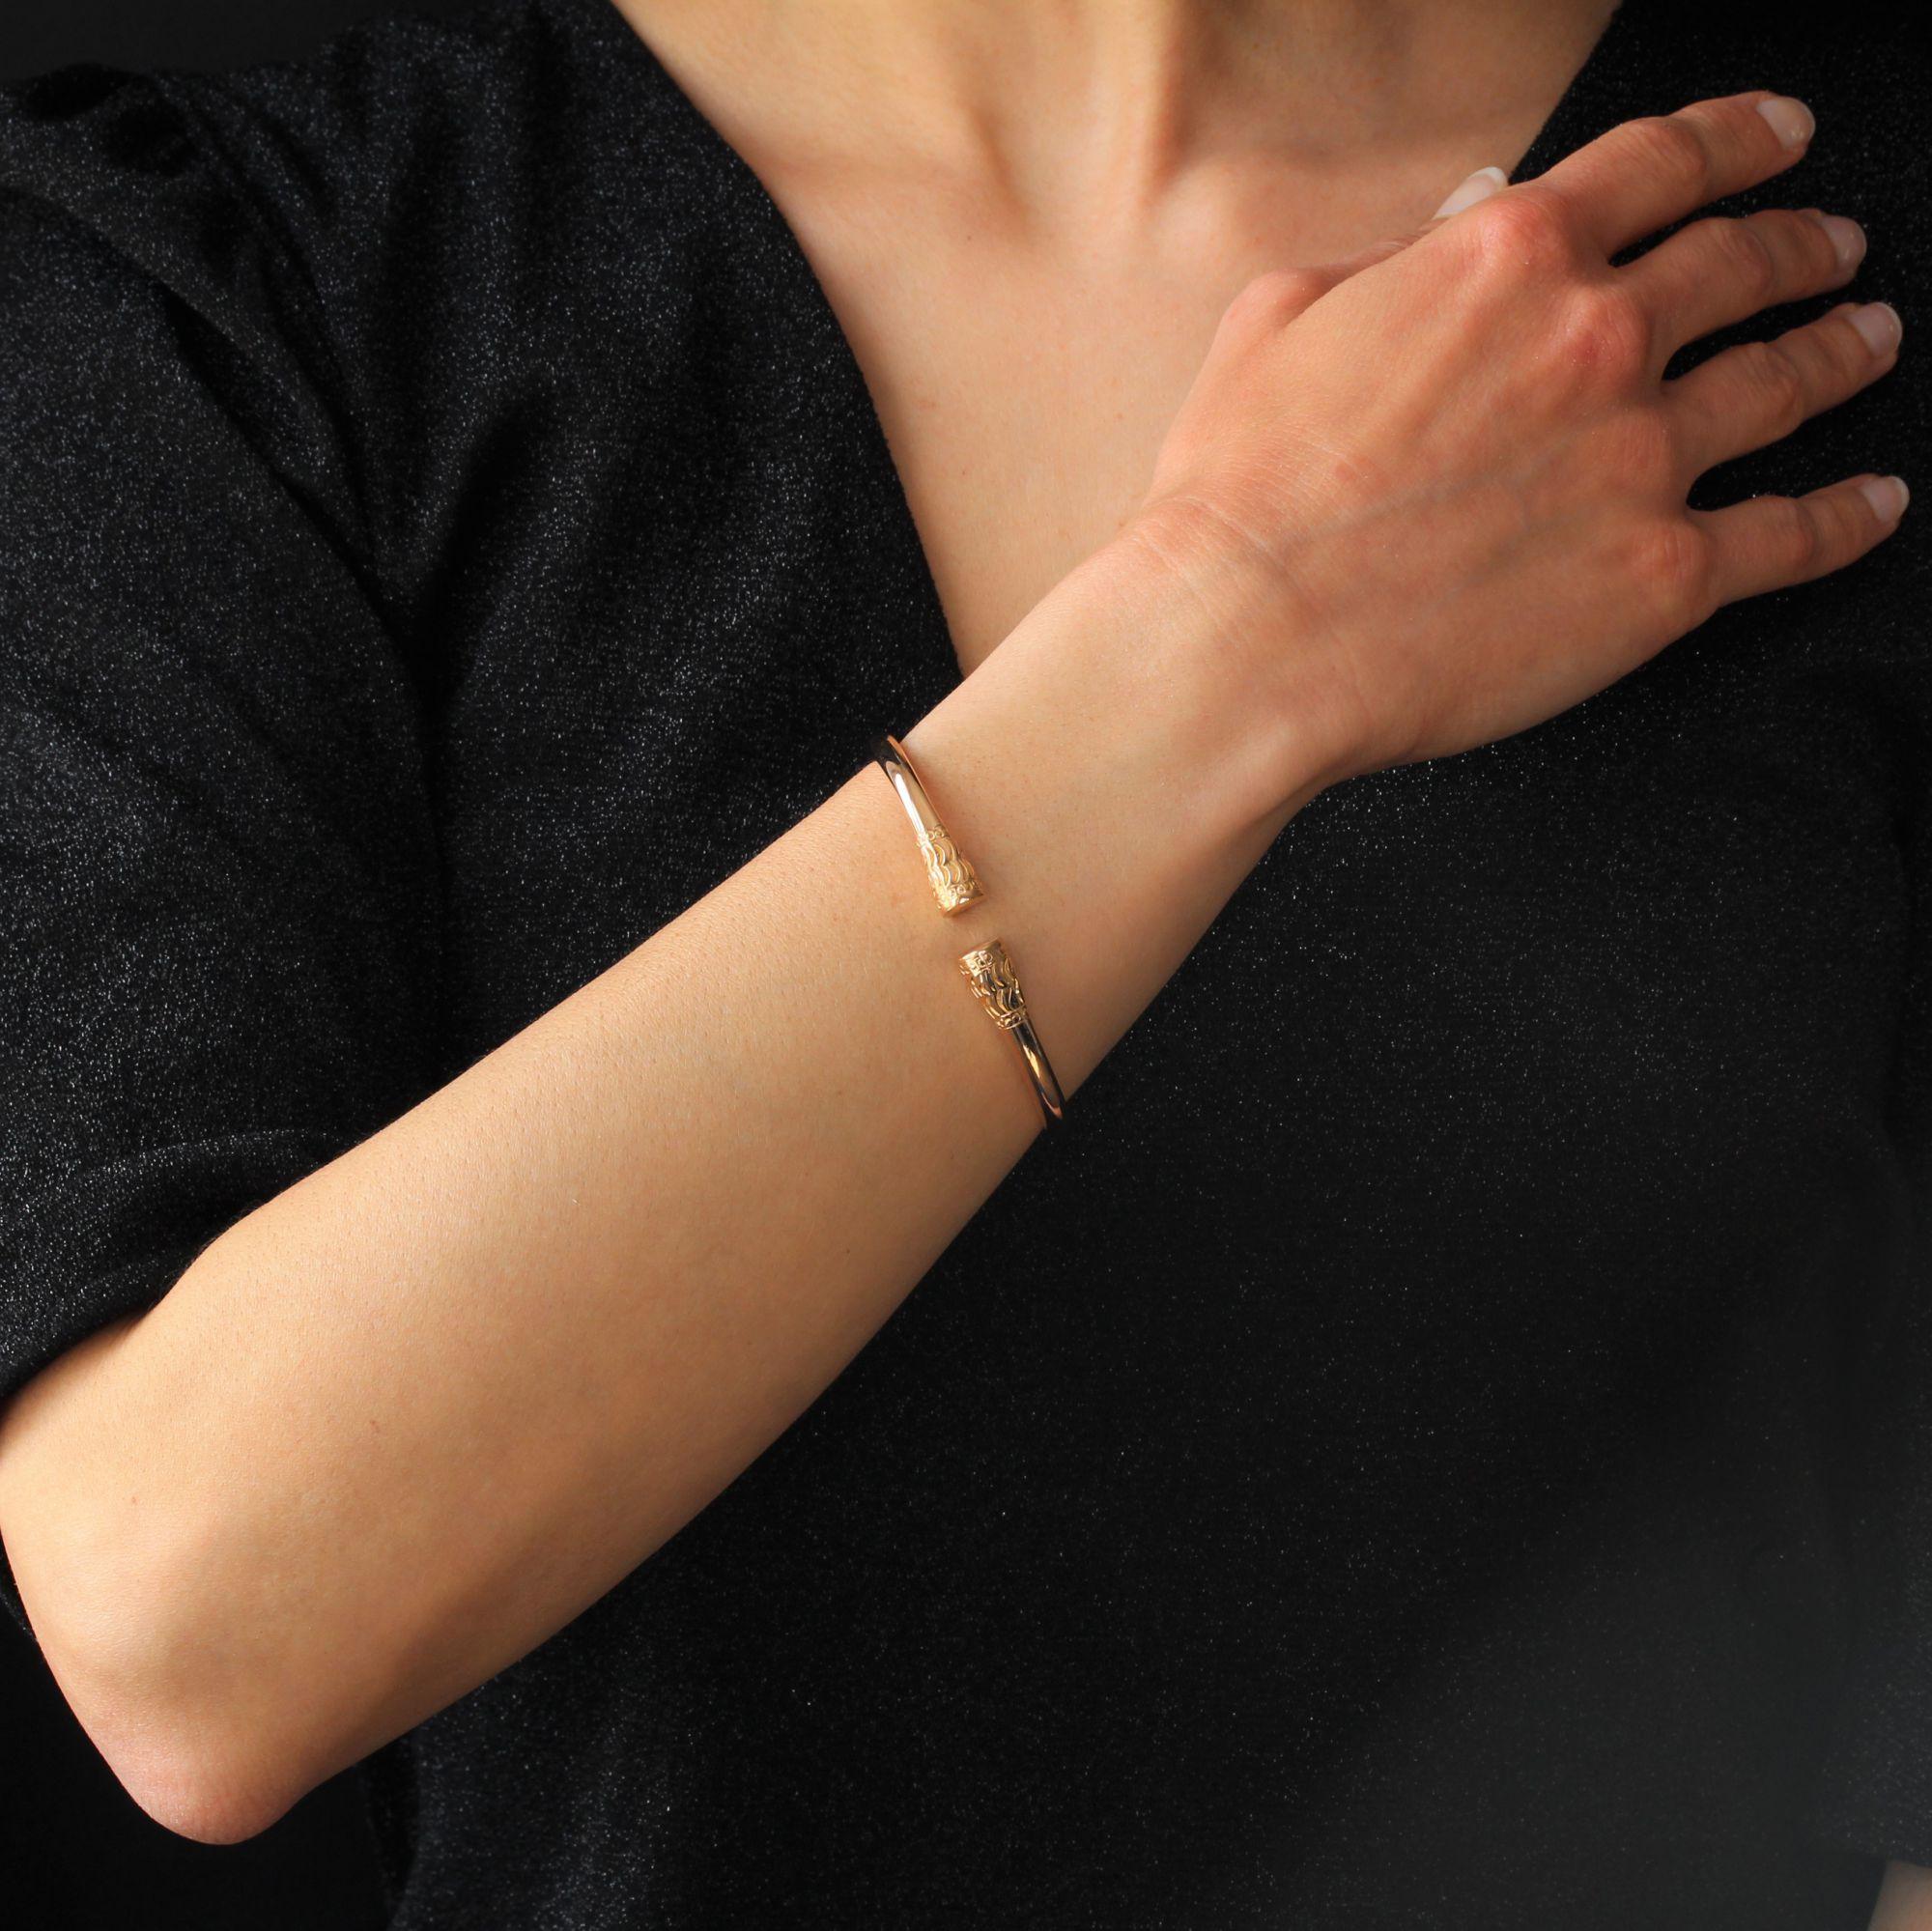 Bracelet in 18 karat rose gold.
Rigid and massive bangle, open on the top, this rose gold bracelet ends with two chiseled tambourines. It is articulated at the base by a hinge with safety 